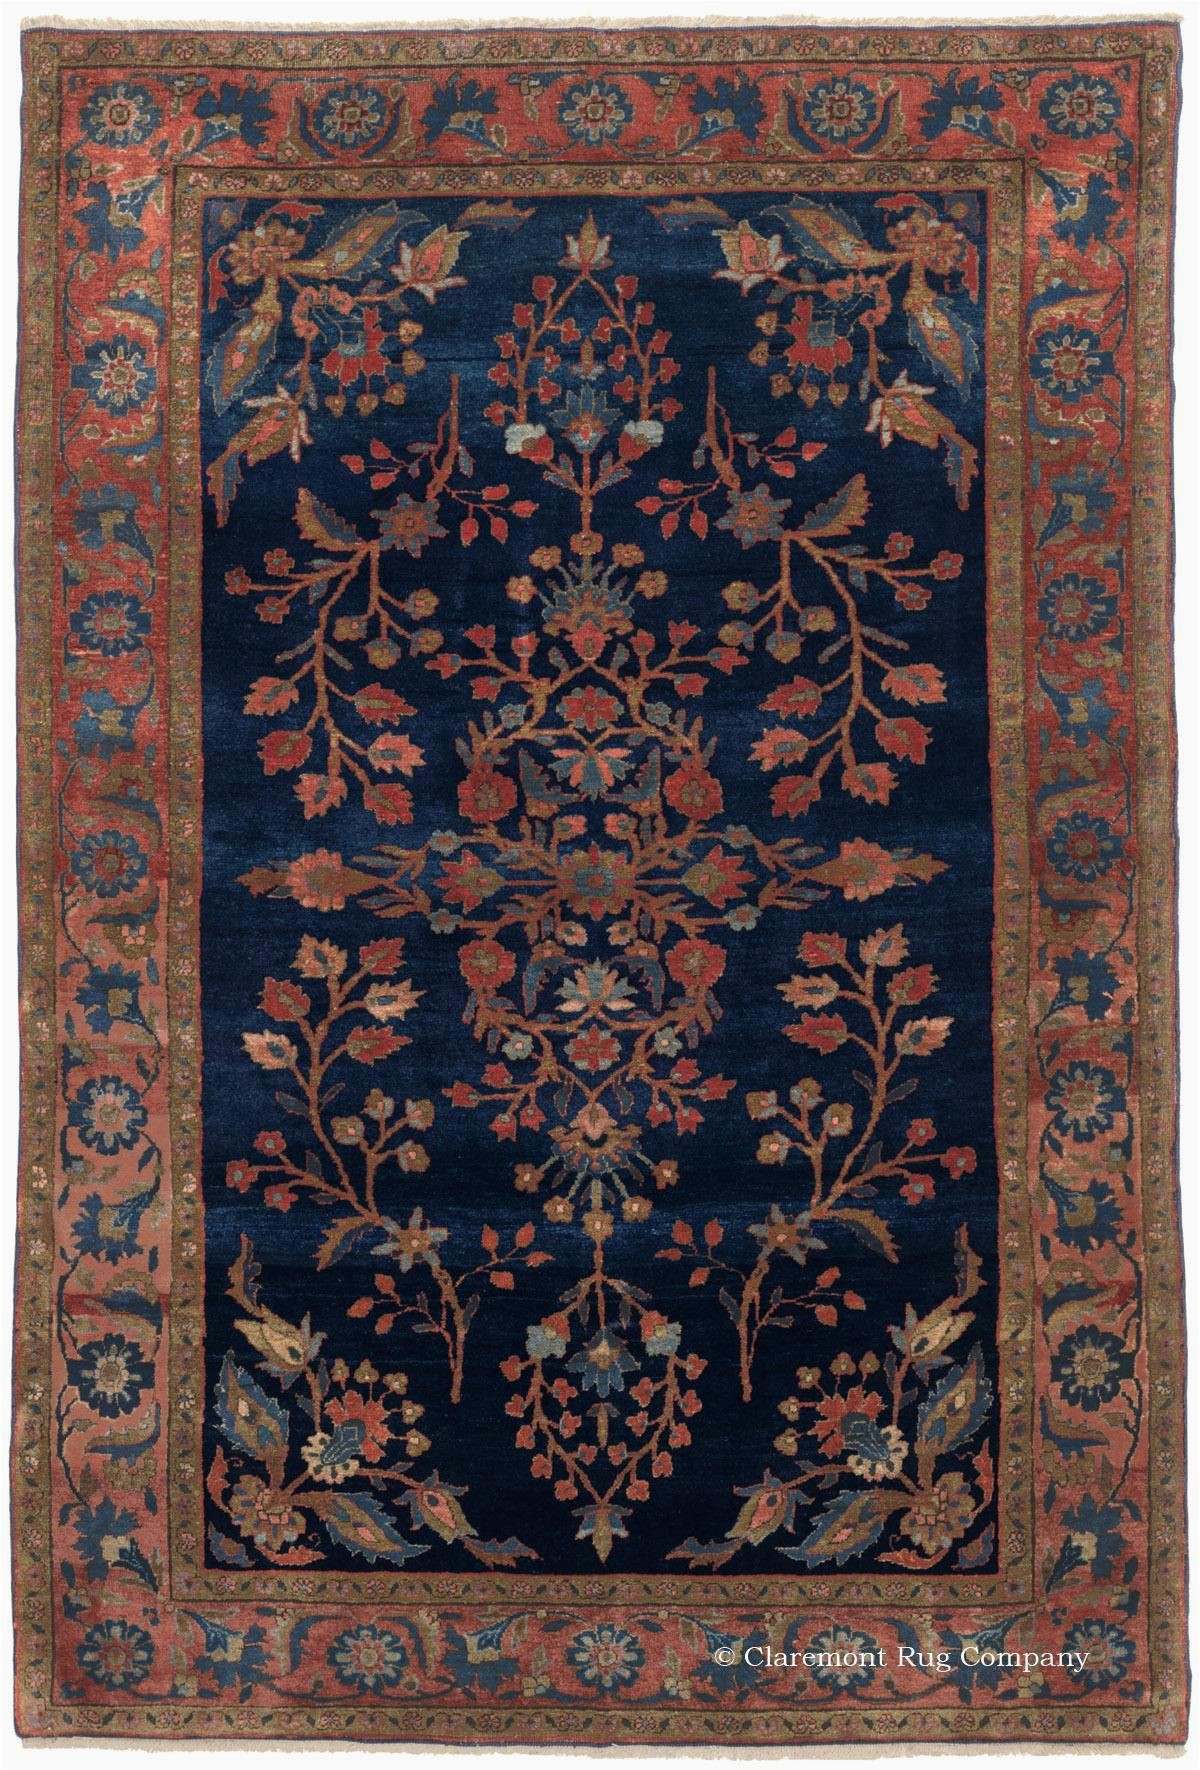 3ft X 4ft area Rug Manchester Kashan Central Persian 3ft 3in X 4ft 11in